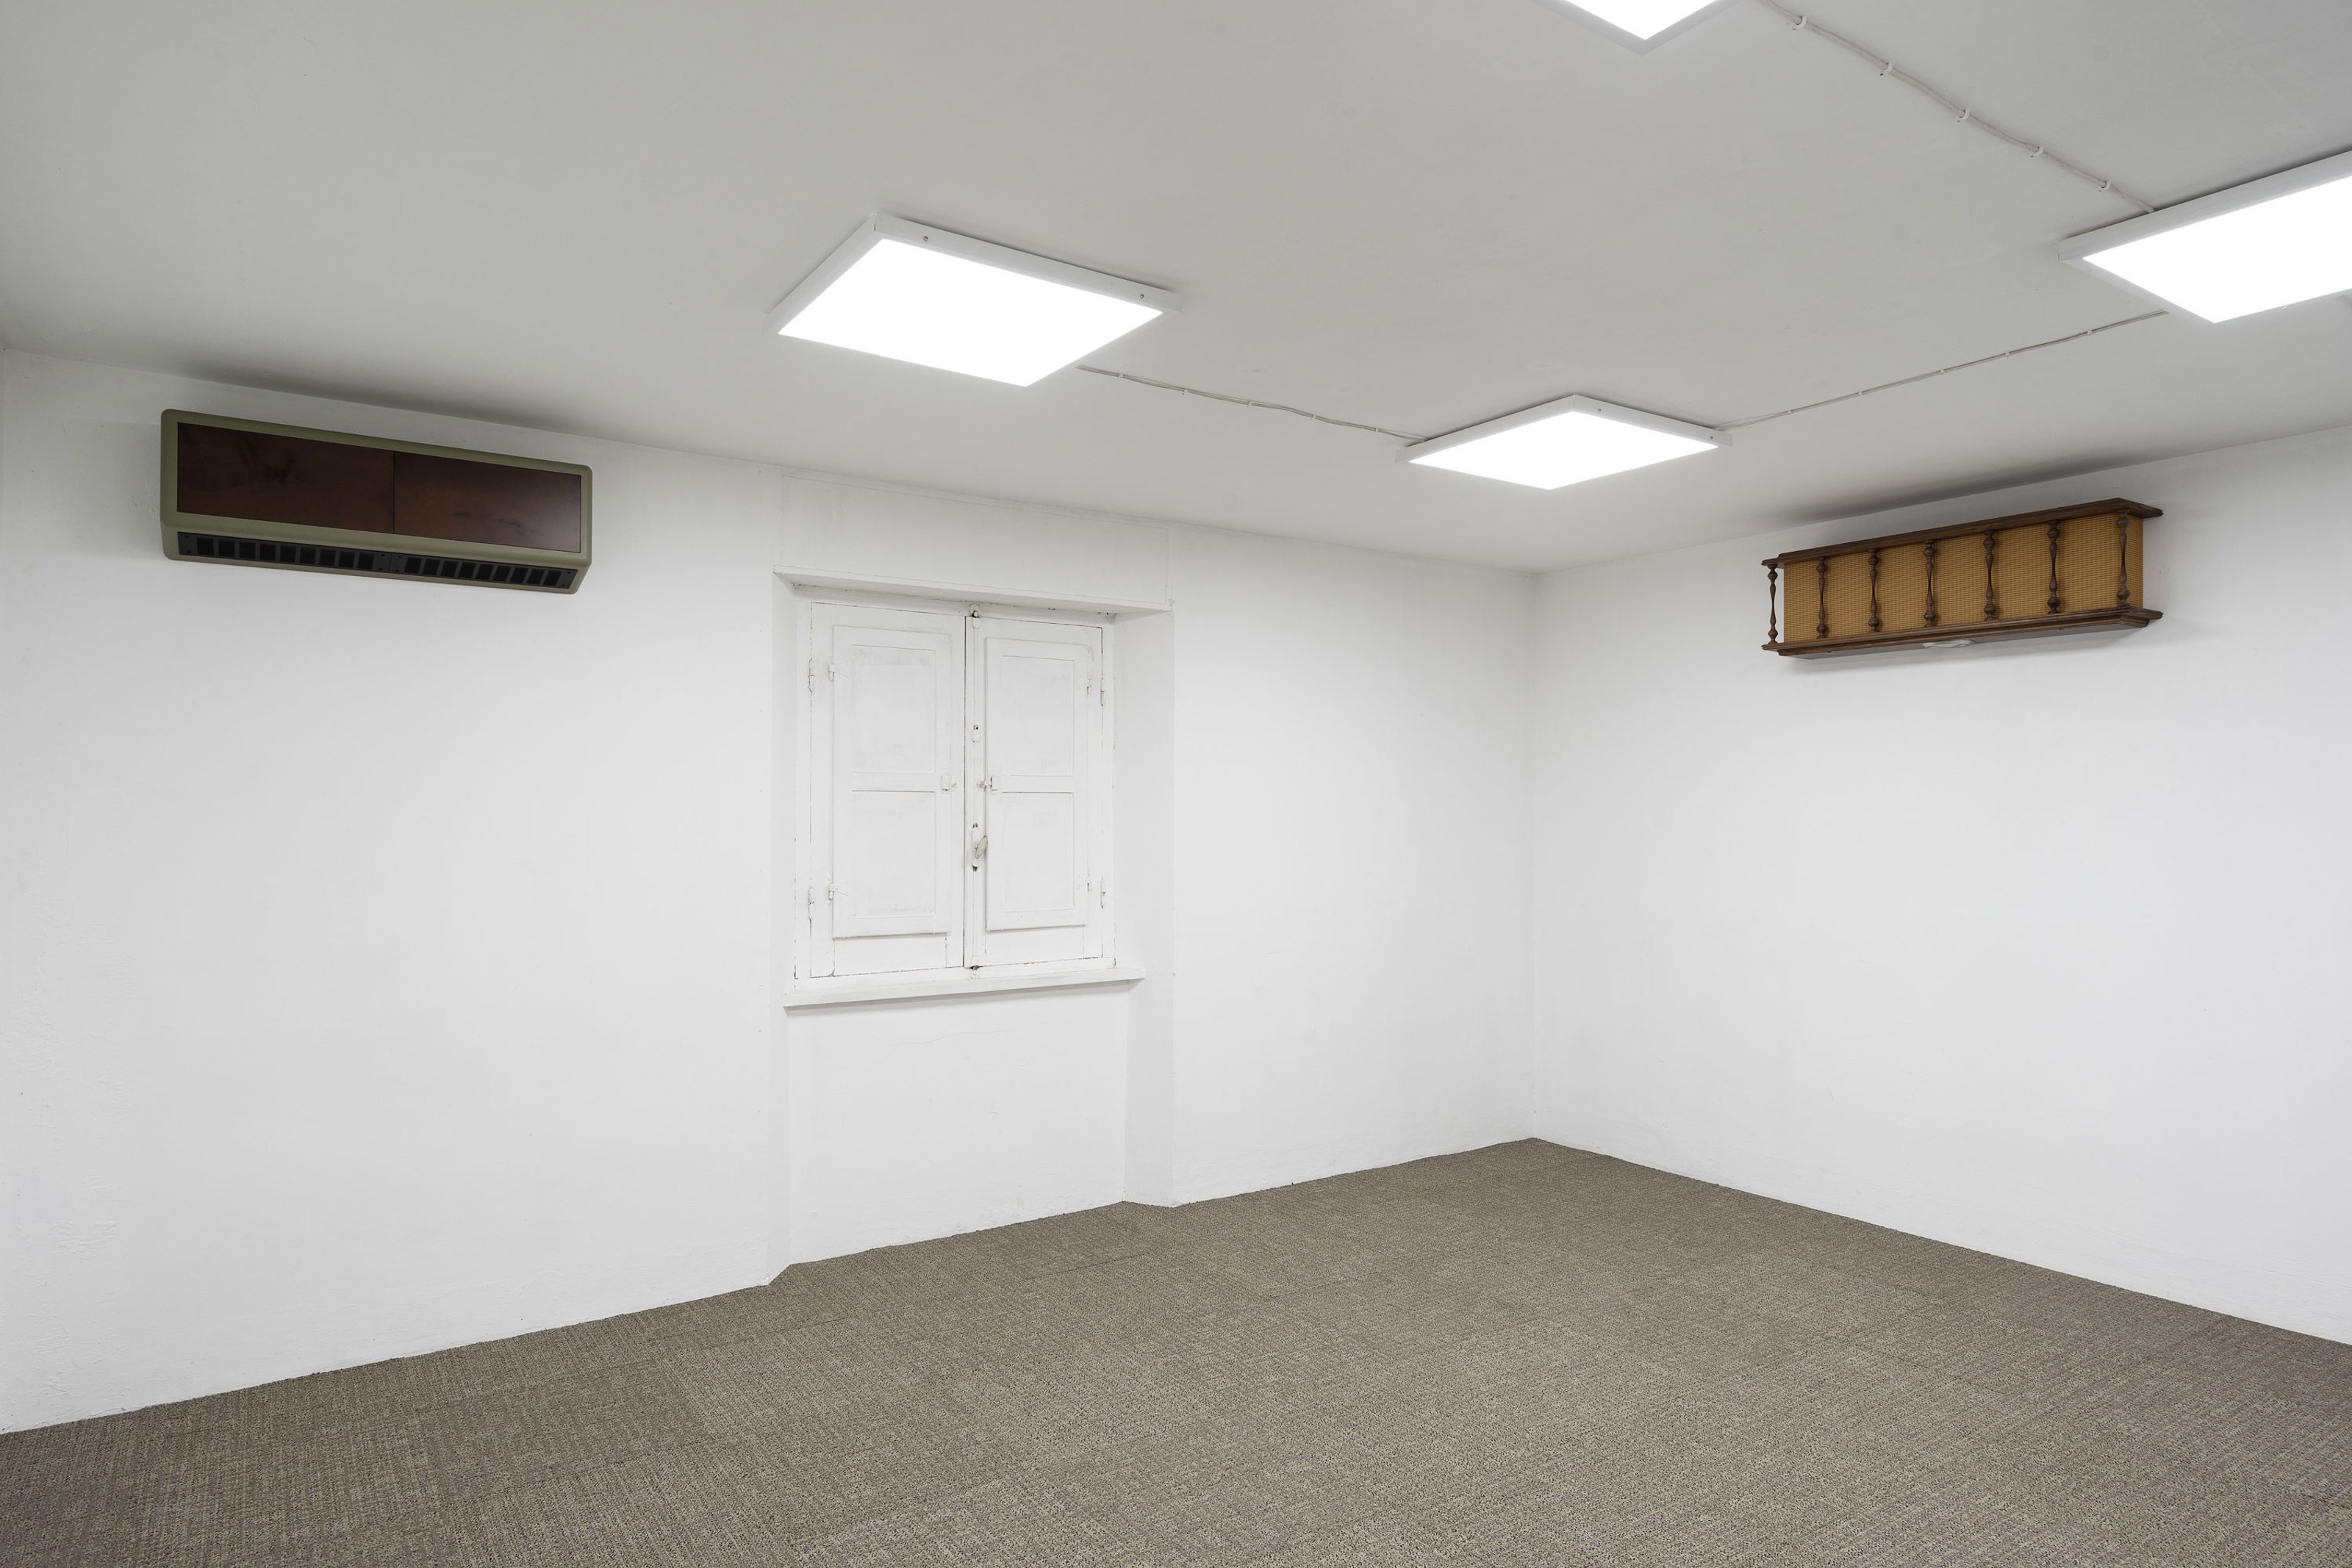 Two rectangular objects hanging on the walls of a room with white walls, gray carpet, illuminated by white lights.